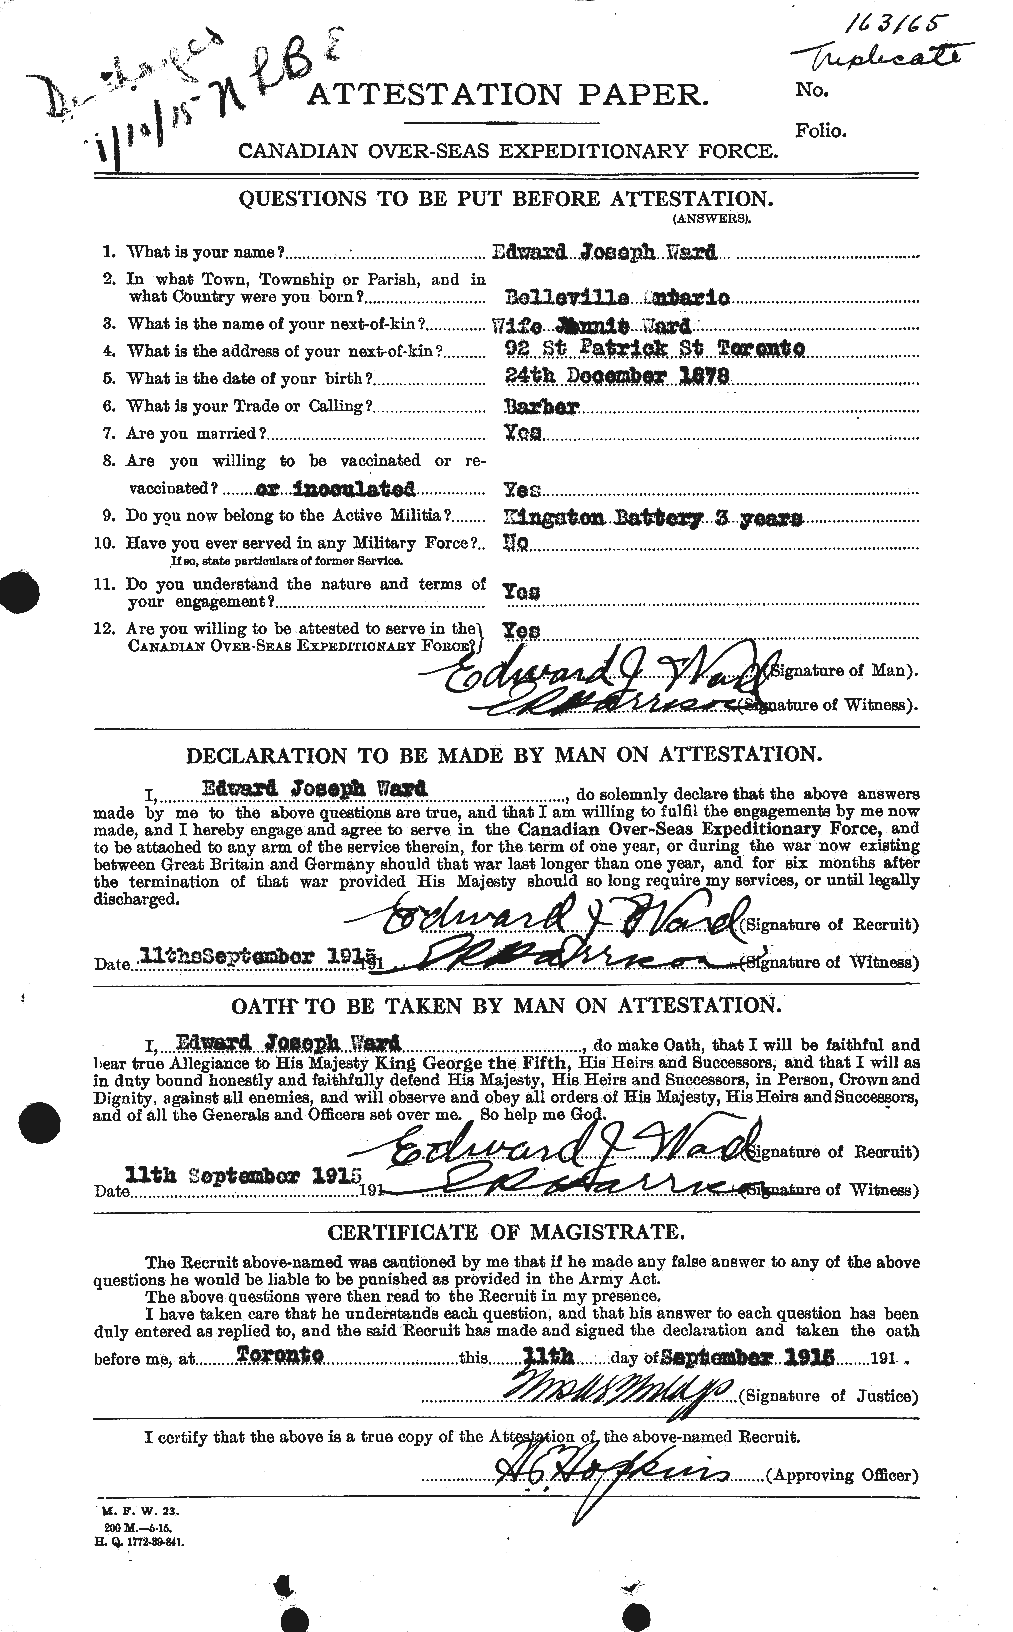 Personnel Records of the First World War - CEF 657655a